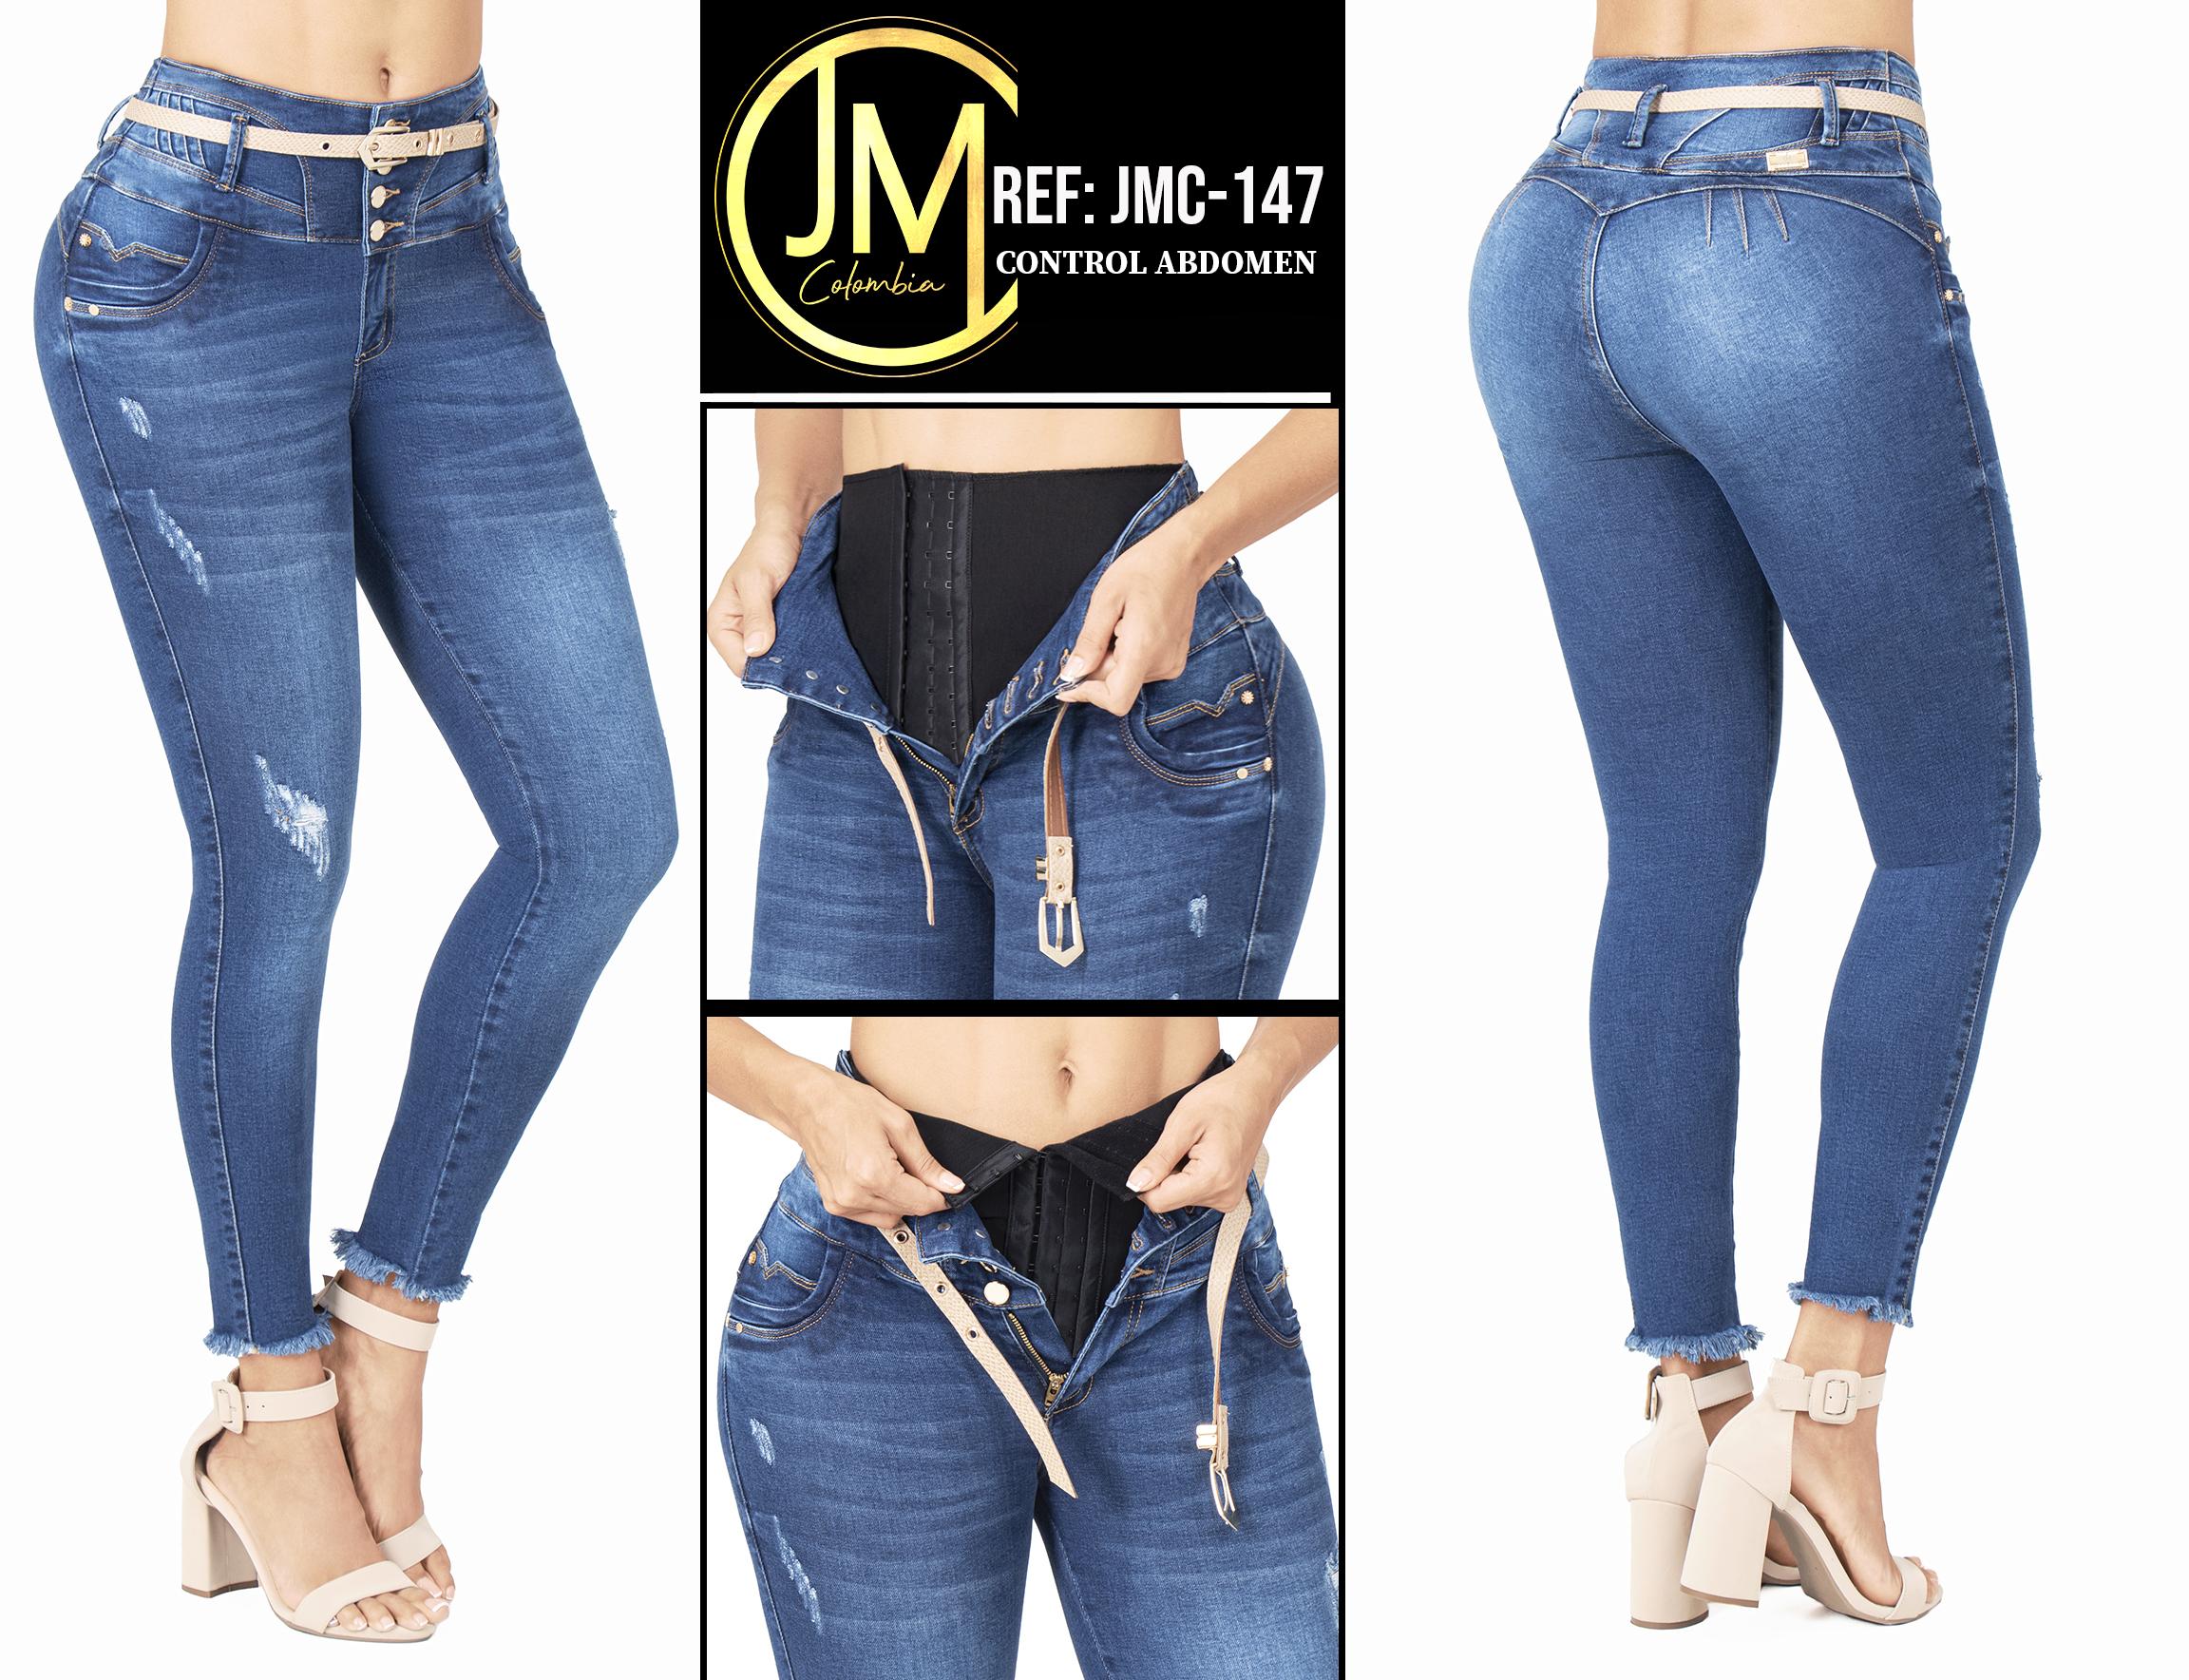 Jeans with internal strip